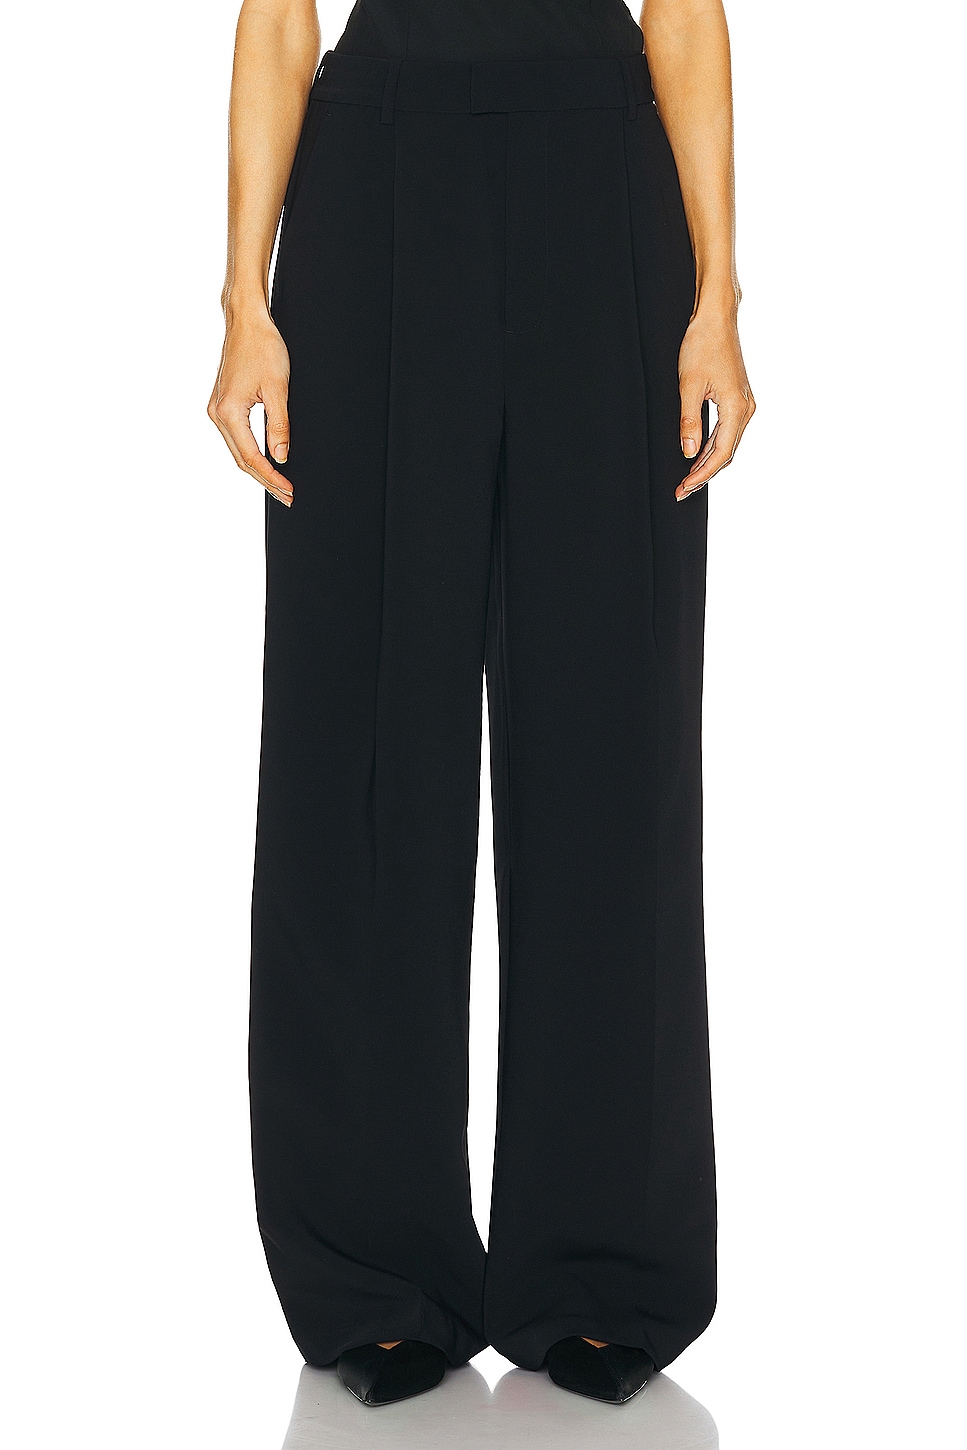 Image 1 of L'Academie by Marianna Gulia Trouser in Black